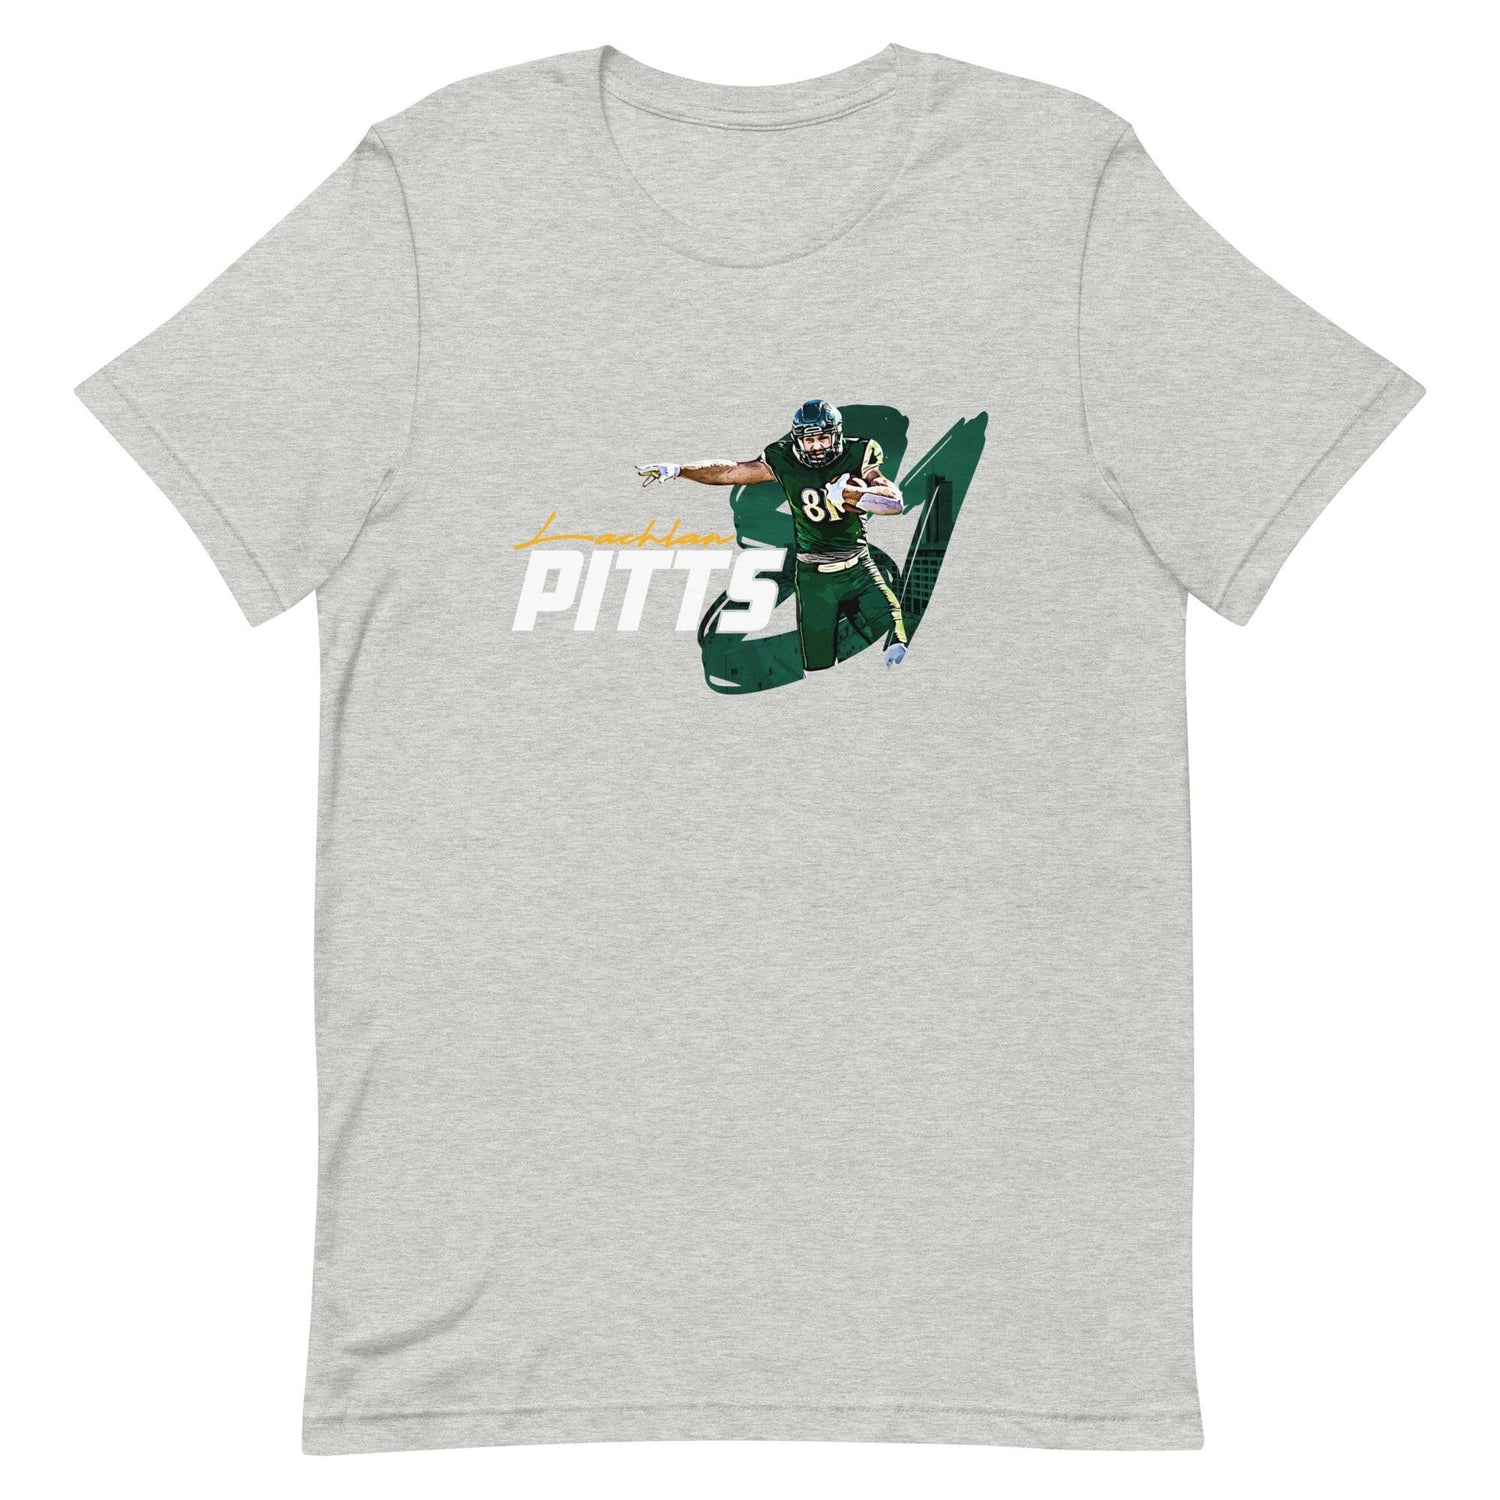 Lachlan Pitts "Gameday" t-shirt - Fan Arch